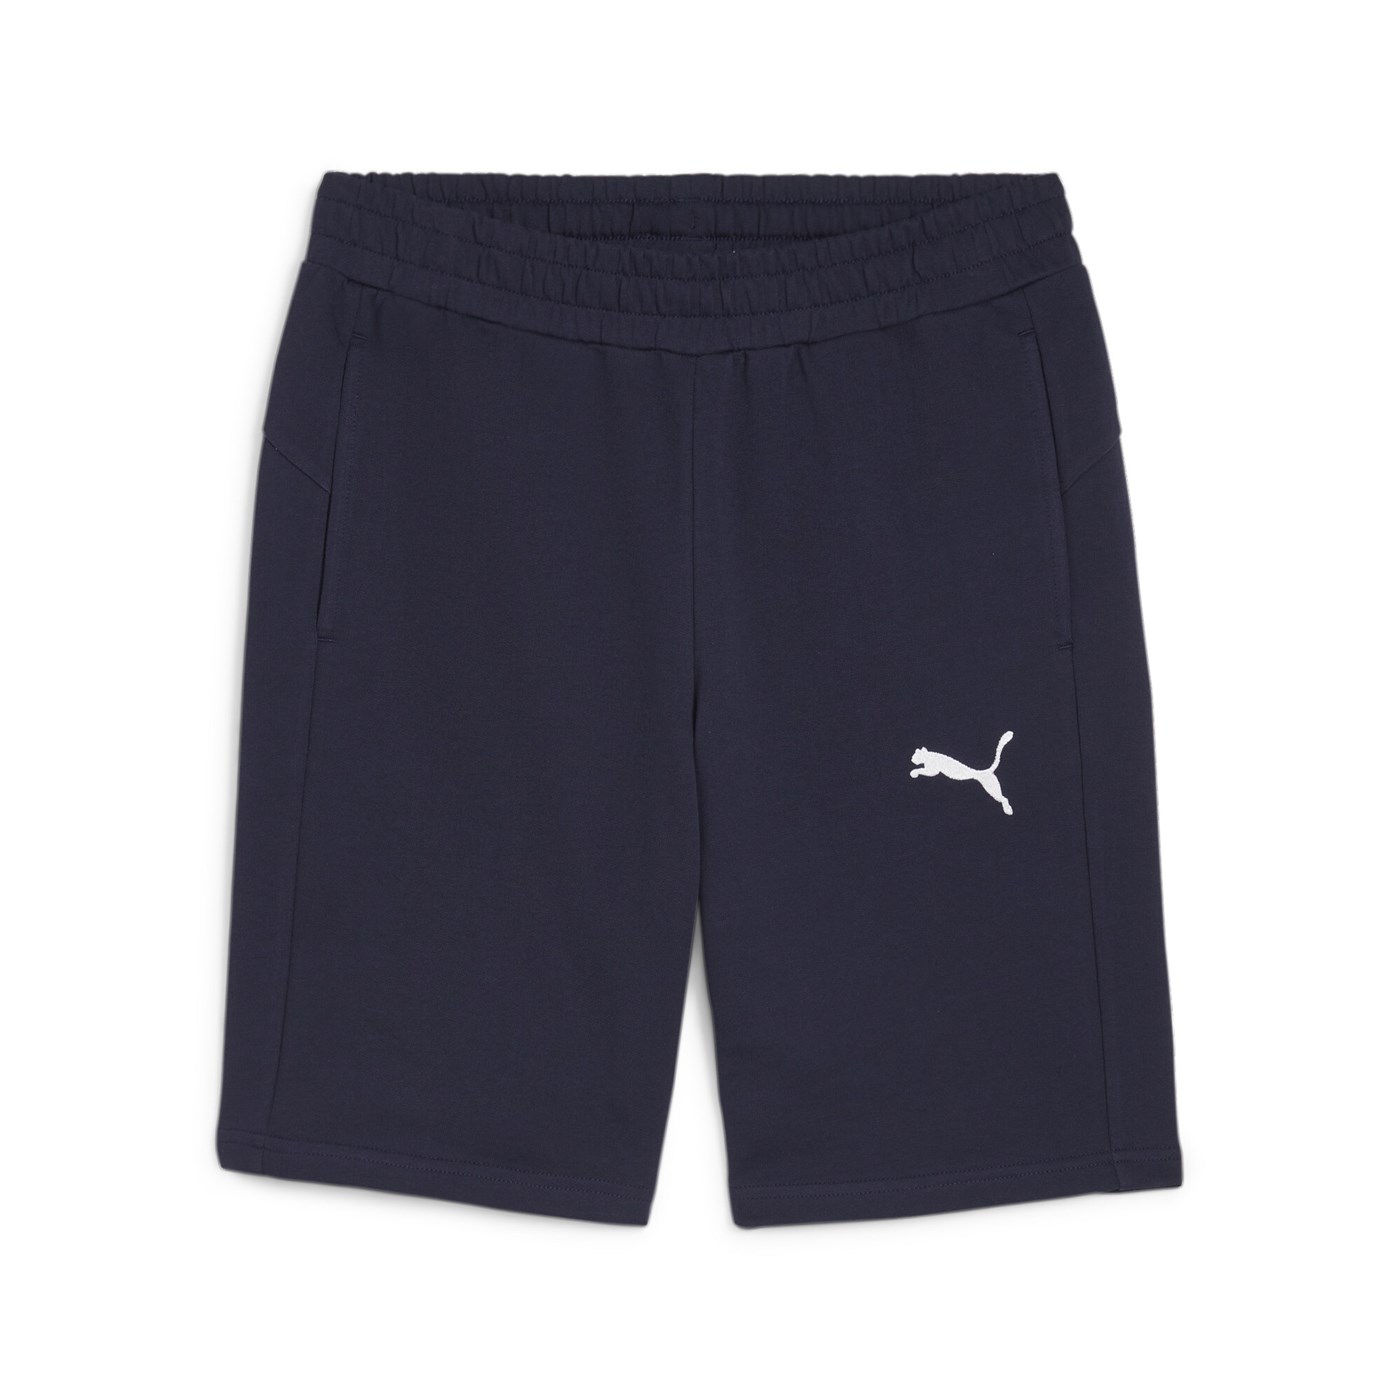 teamGOAL 23 Casuals Shorts 658608